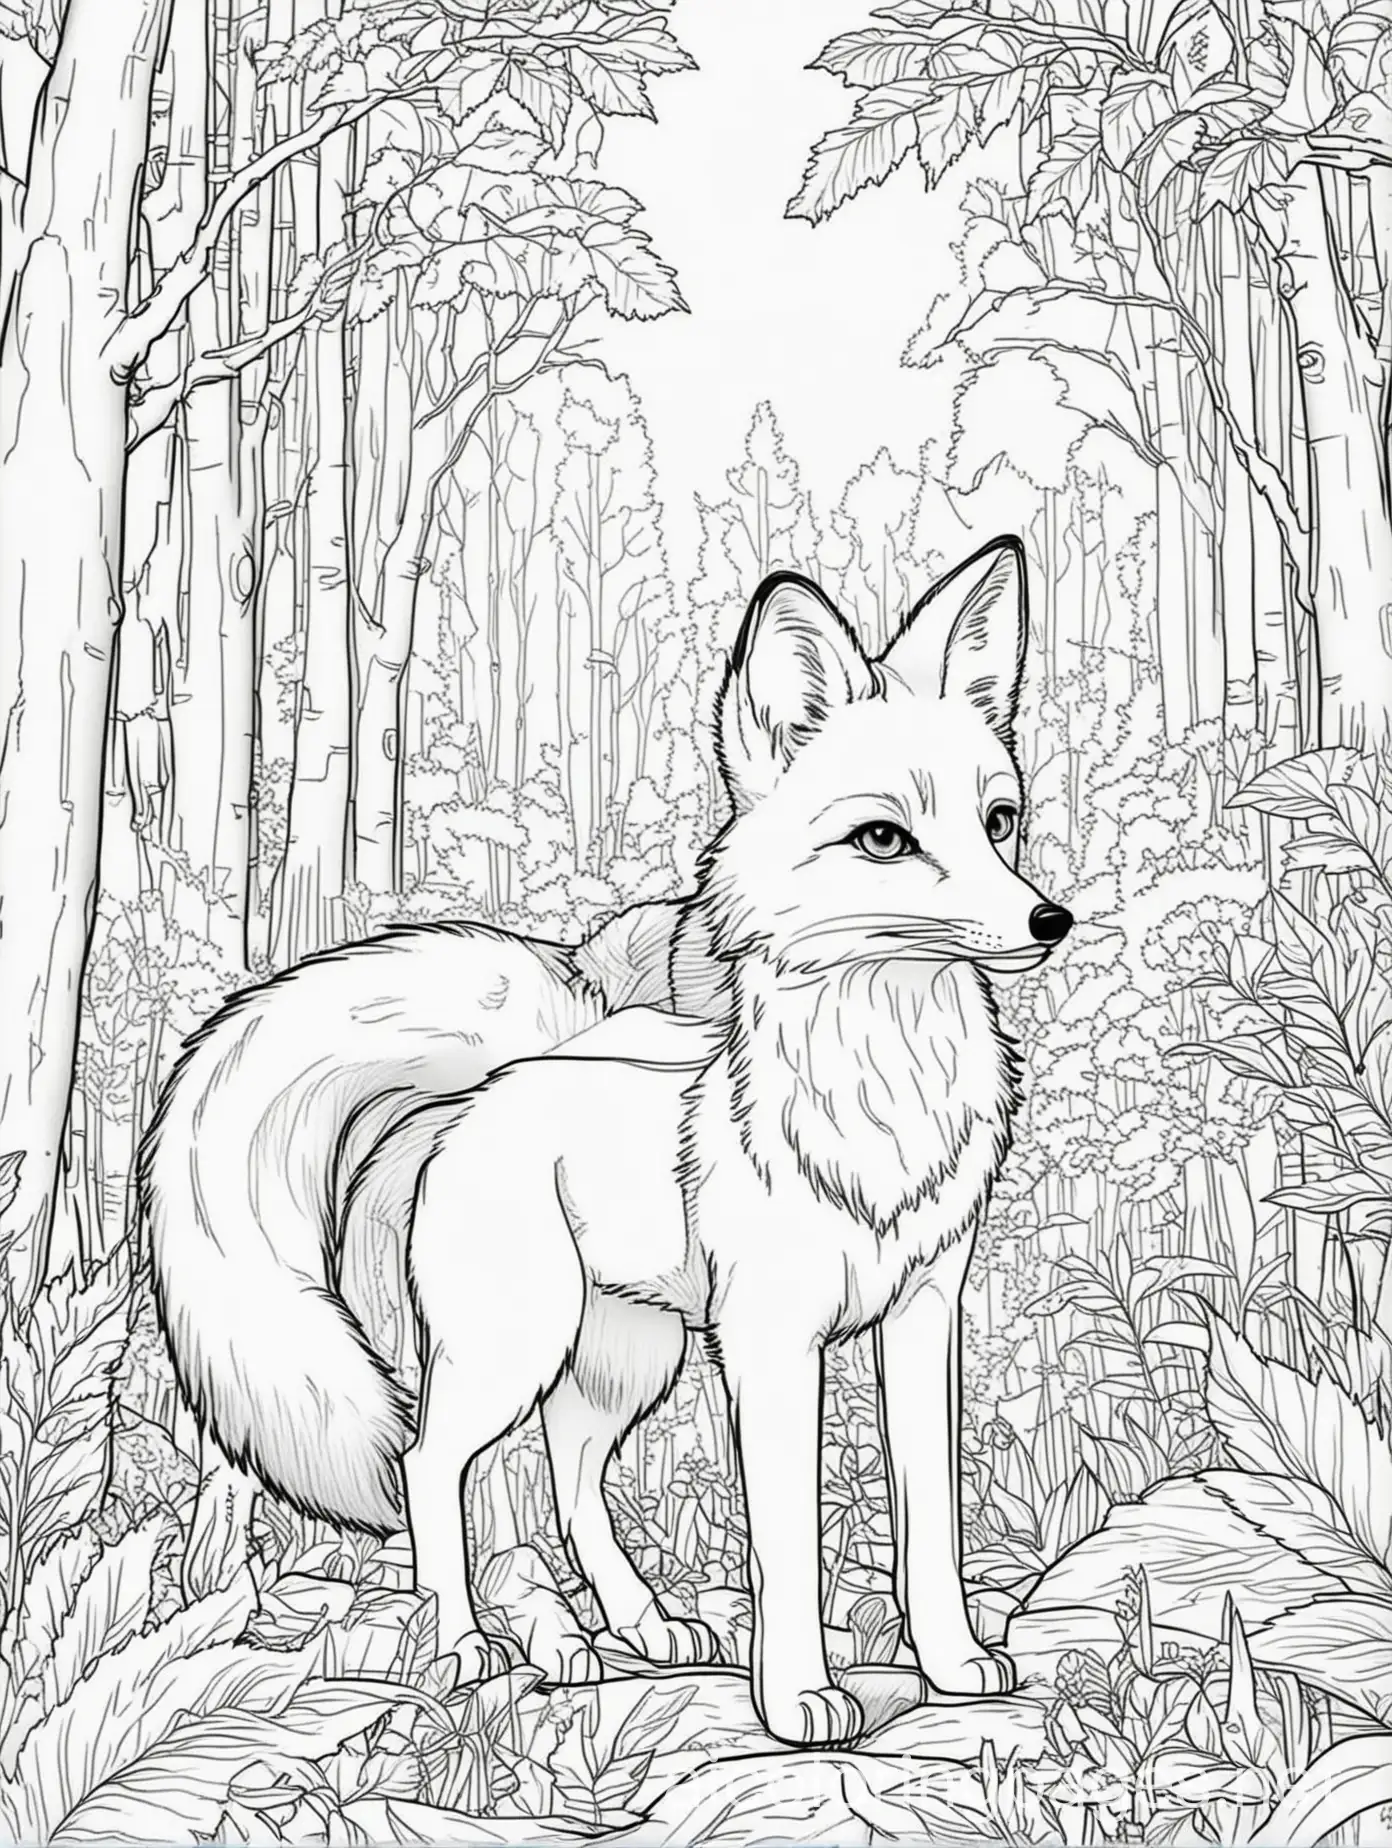 AN ANIMAL FOX IN THE FOREST, Coloring Page, black and white, line art, white background, Simplicity, Ample White Space. The background of the coloring page is plain white to make it easy for young children to color within the lines. The outlines of all the subjects are easy to distinguish, making it simple for kids to color without too much difficulty